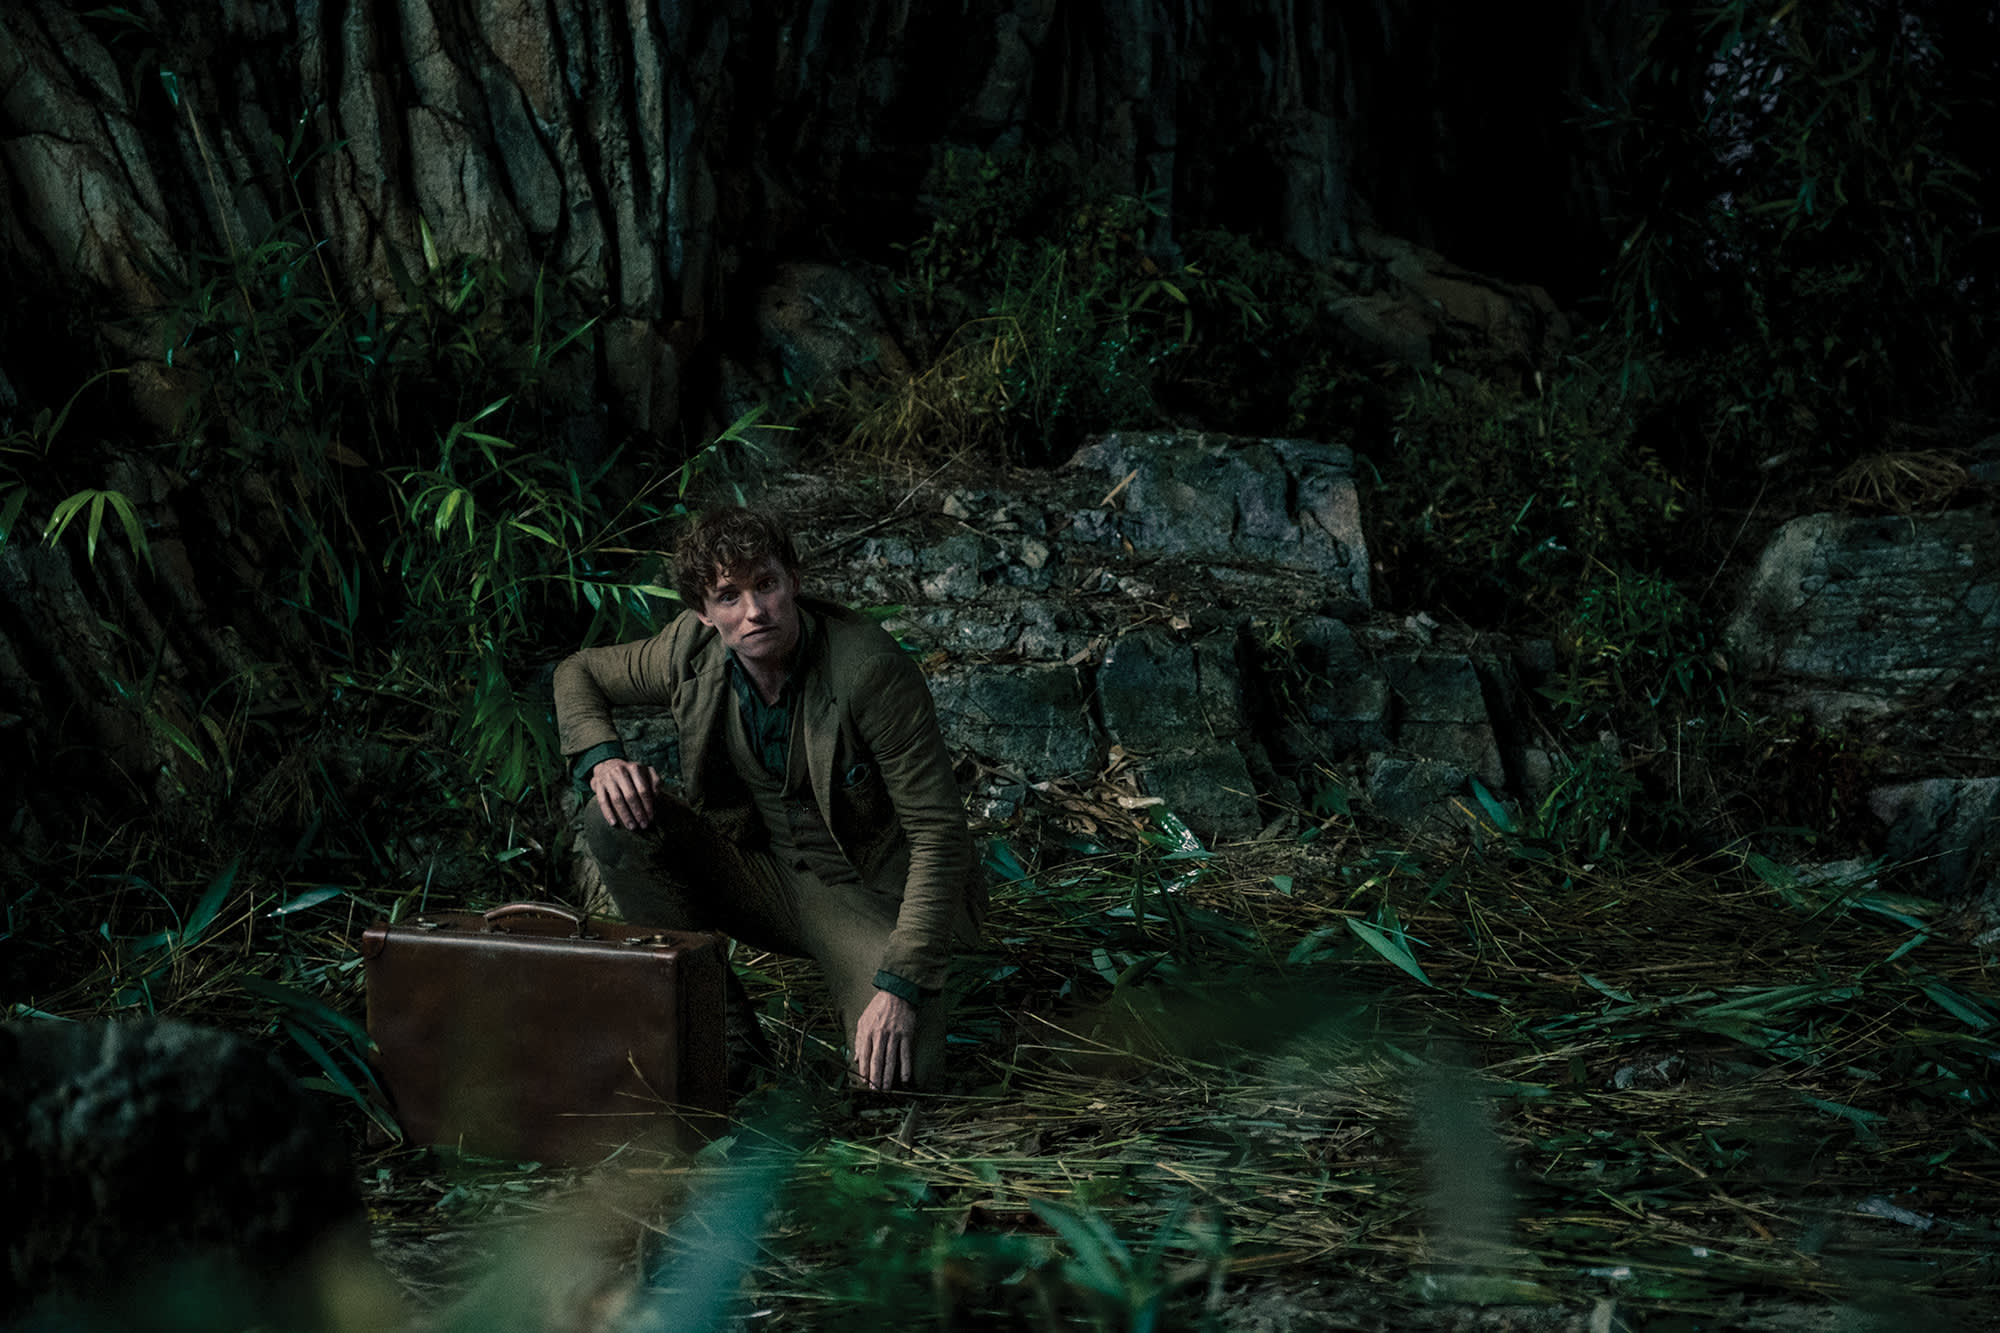 Newt is crouching down by his case while in a jungle